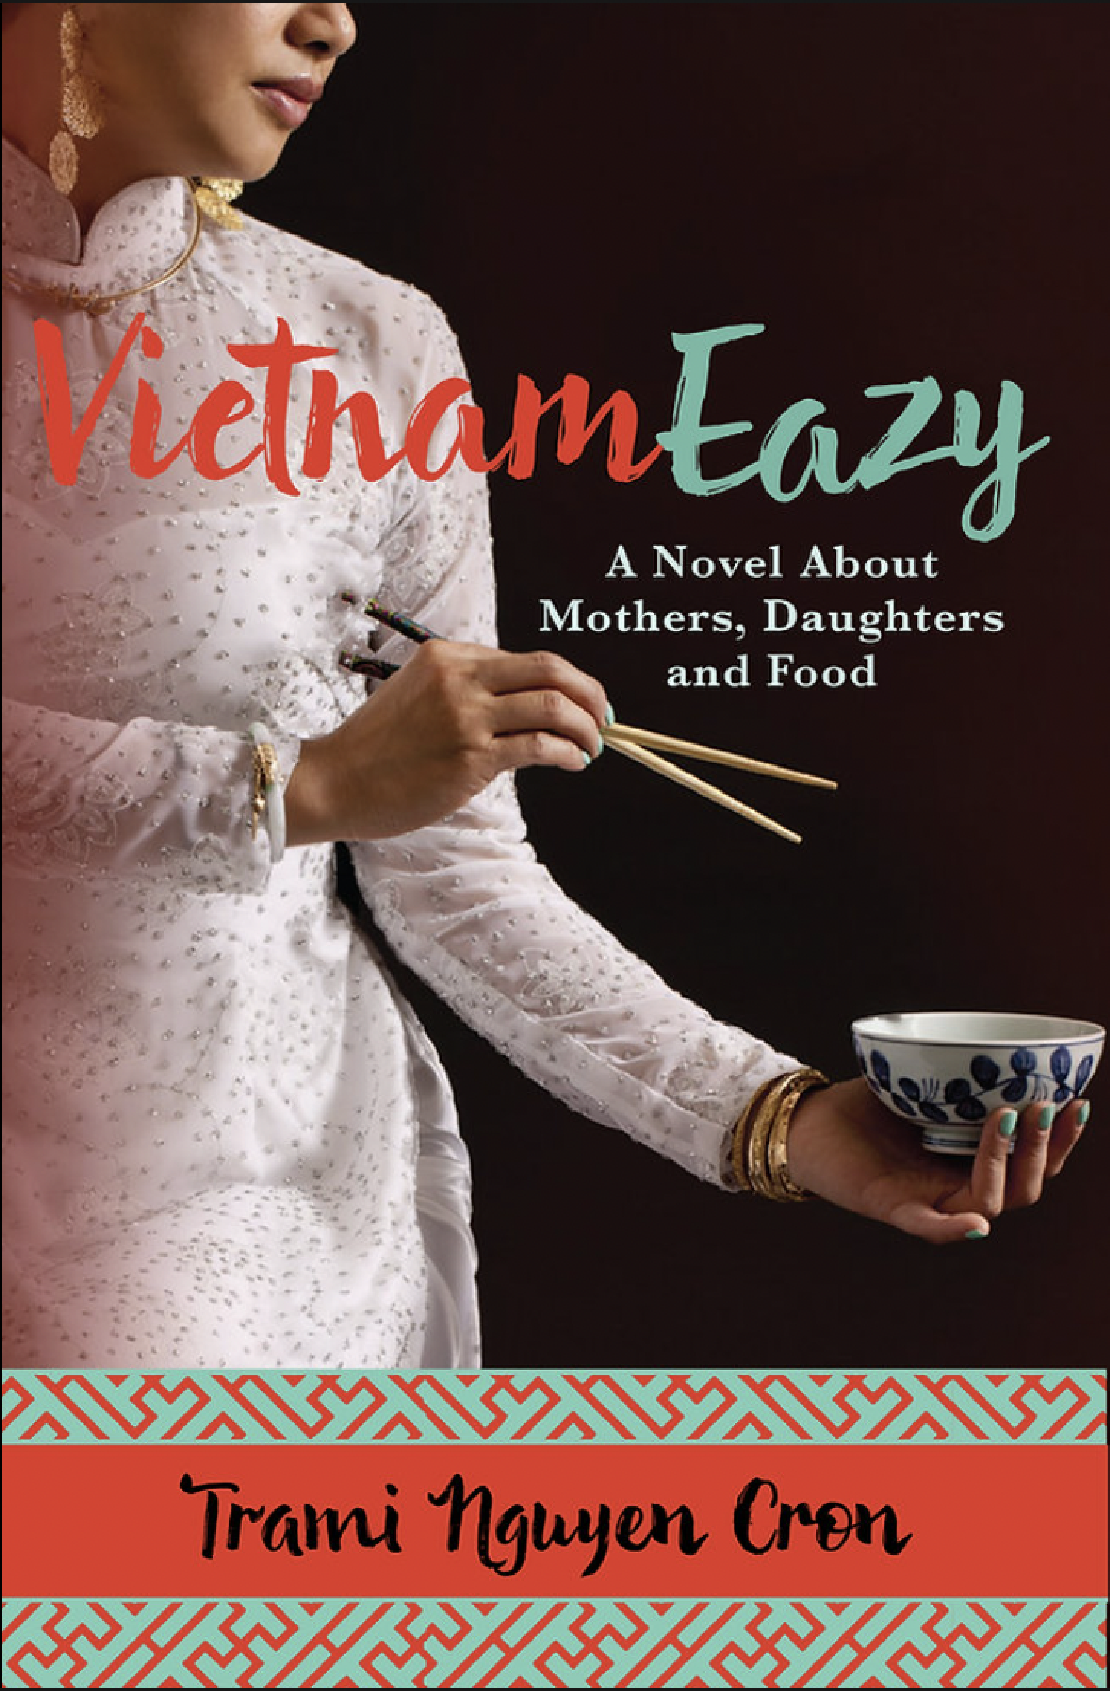 Vietnameasy: A Novel about Mothers, Daughters and Food